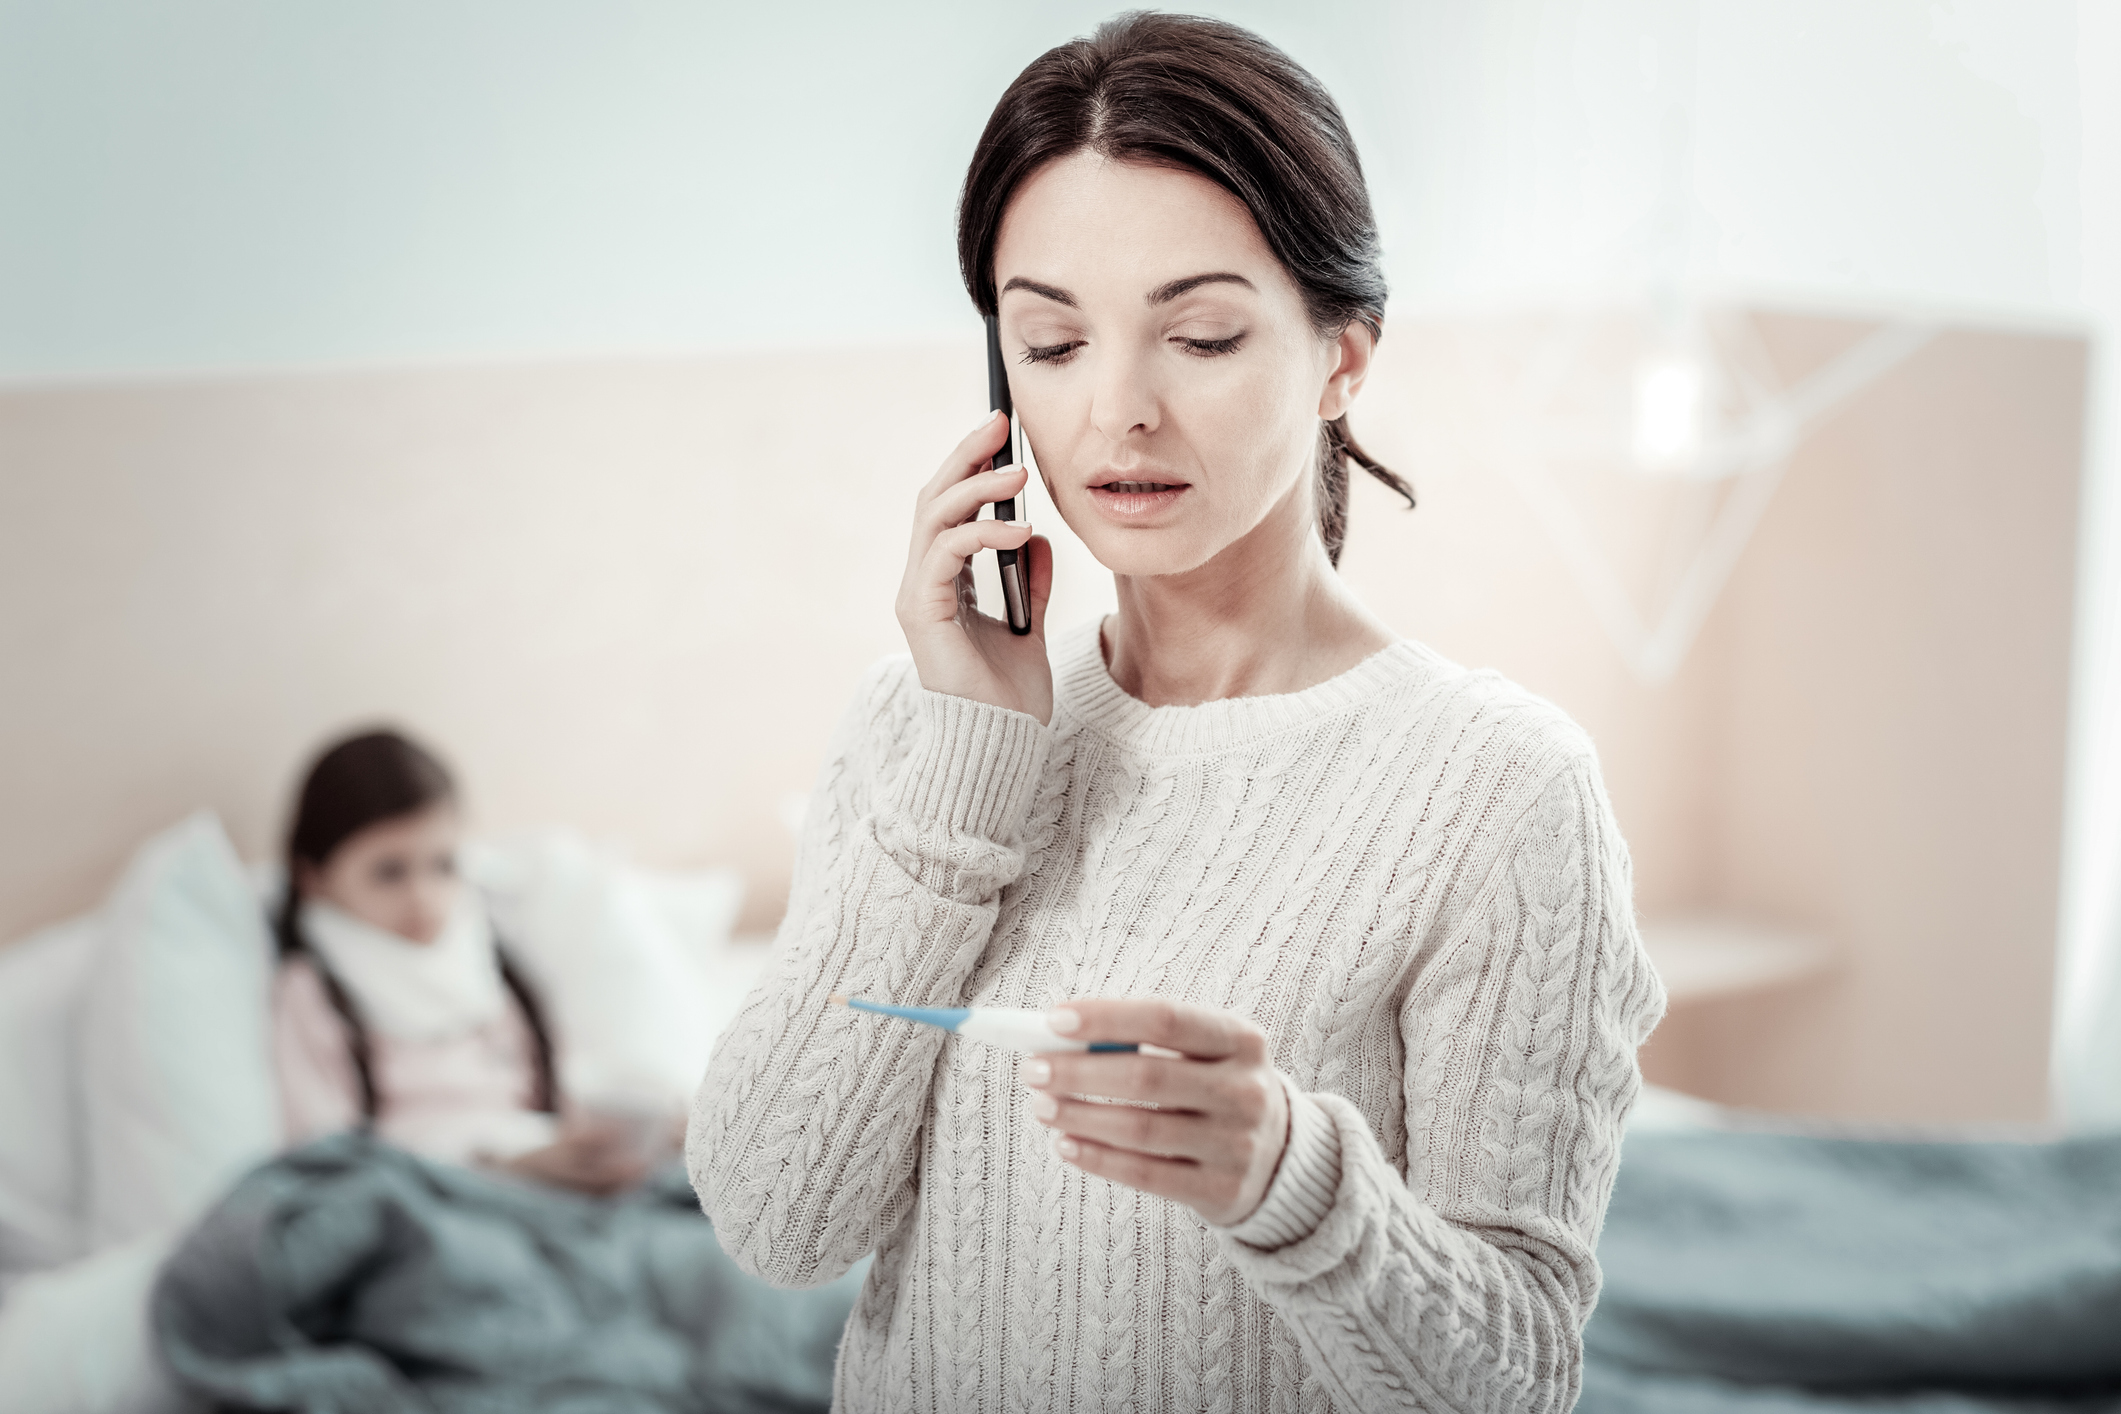 A mother gives thermometer readings over the phone to an ASO while her daughter is resting in bed.